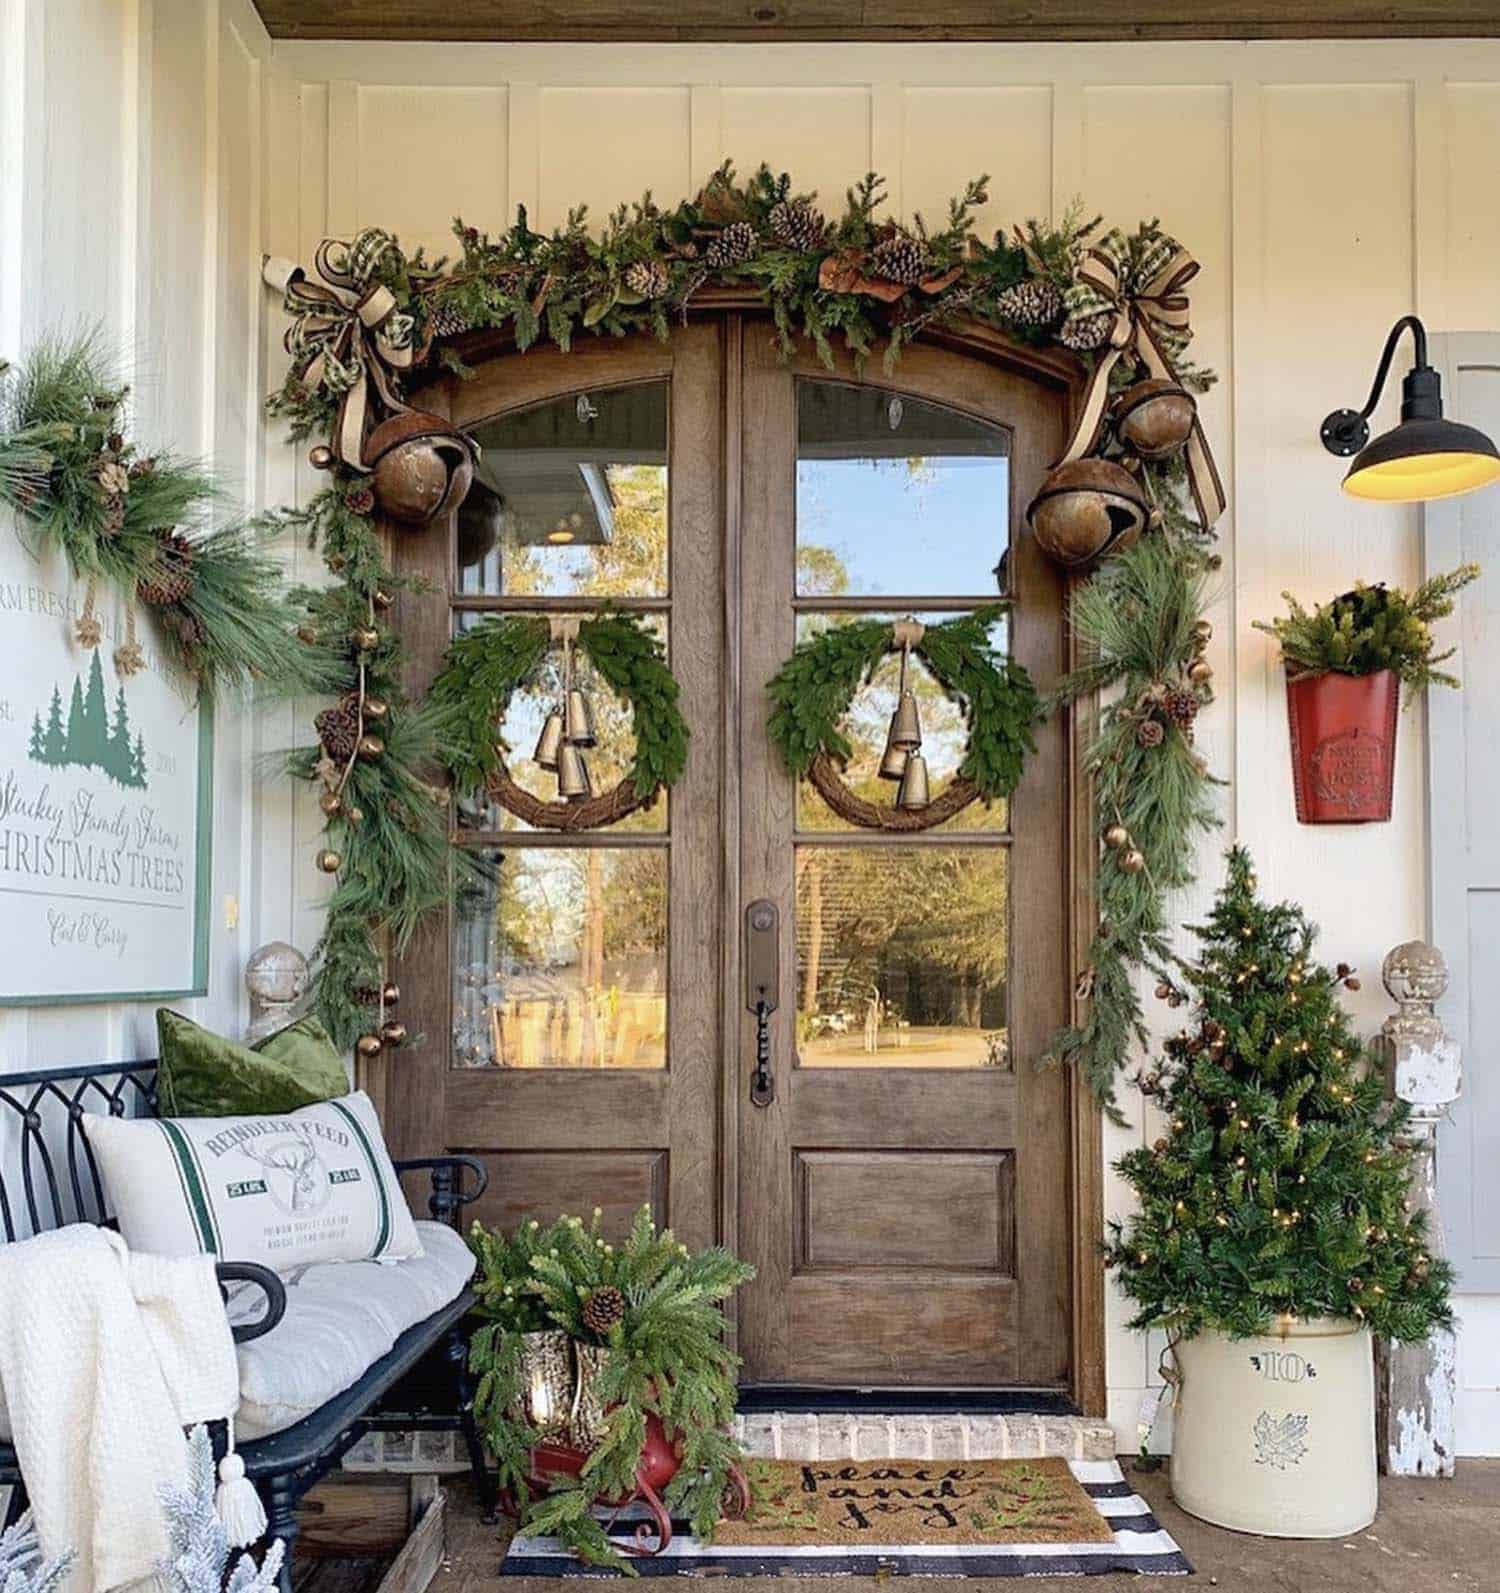 Christmas decorated front porch with a woodsy, natural, green theme